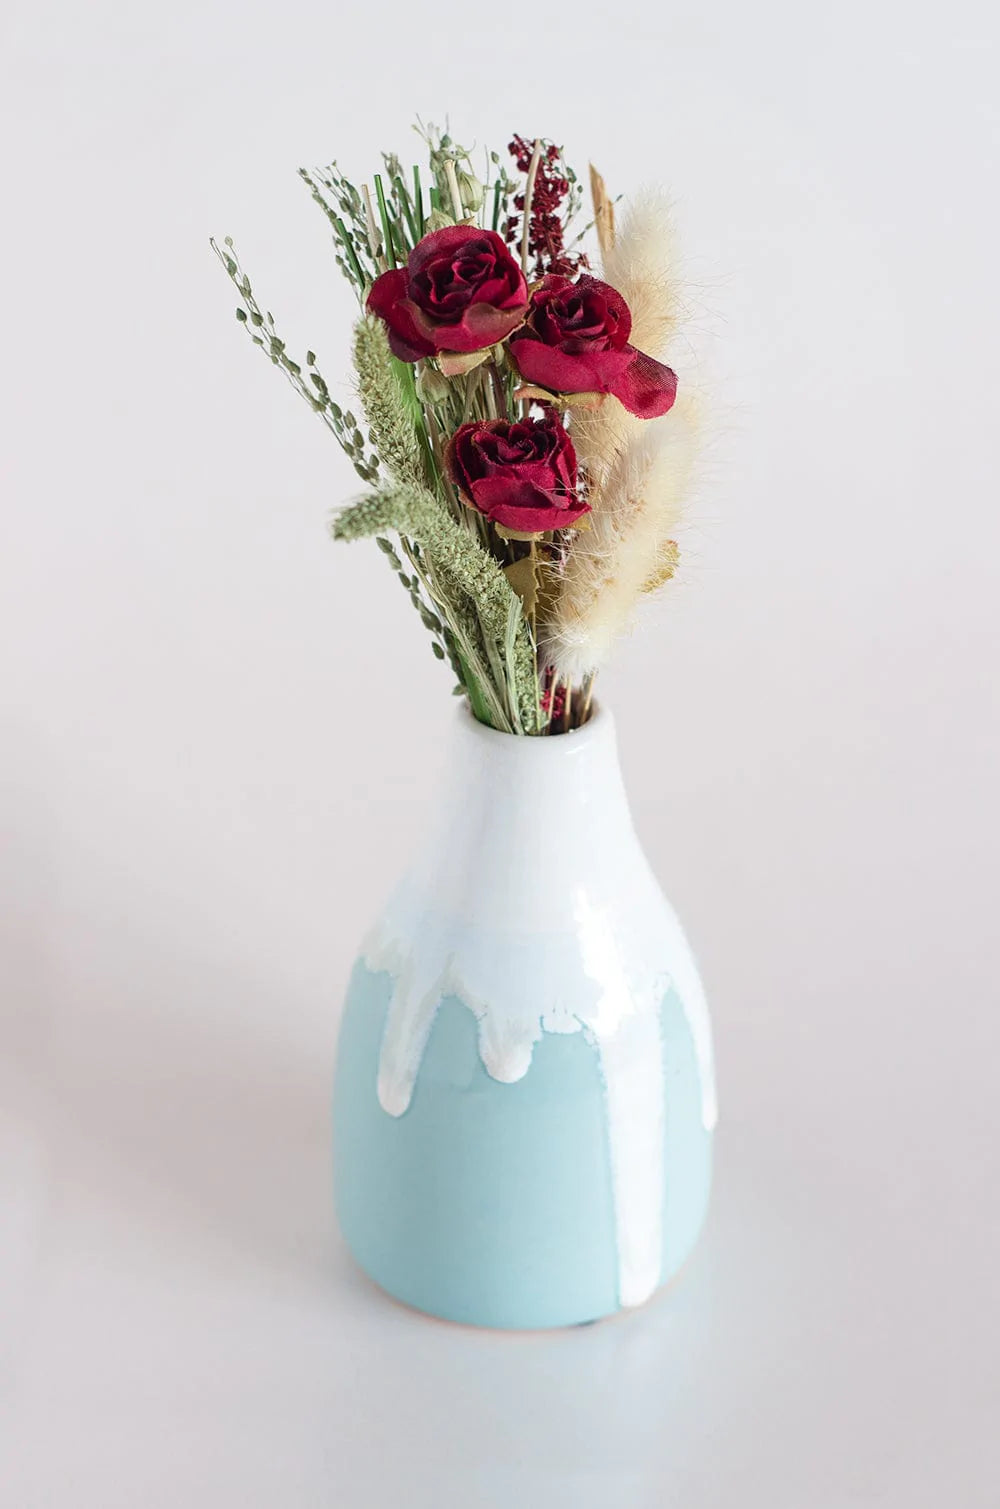 Flower Rose Emerald Bouquet with vase